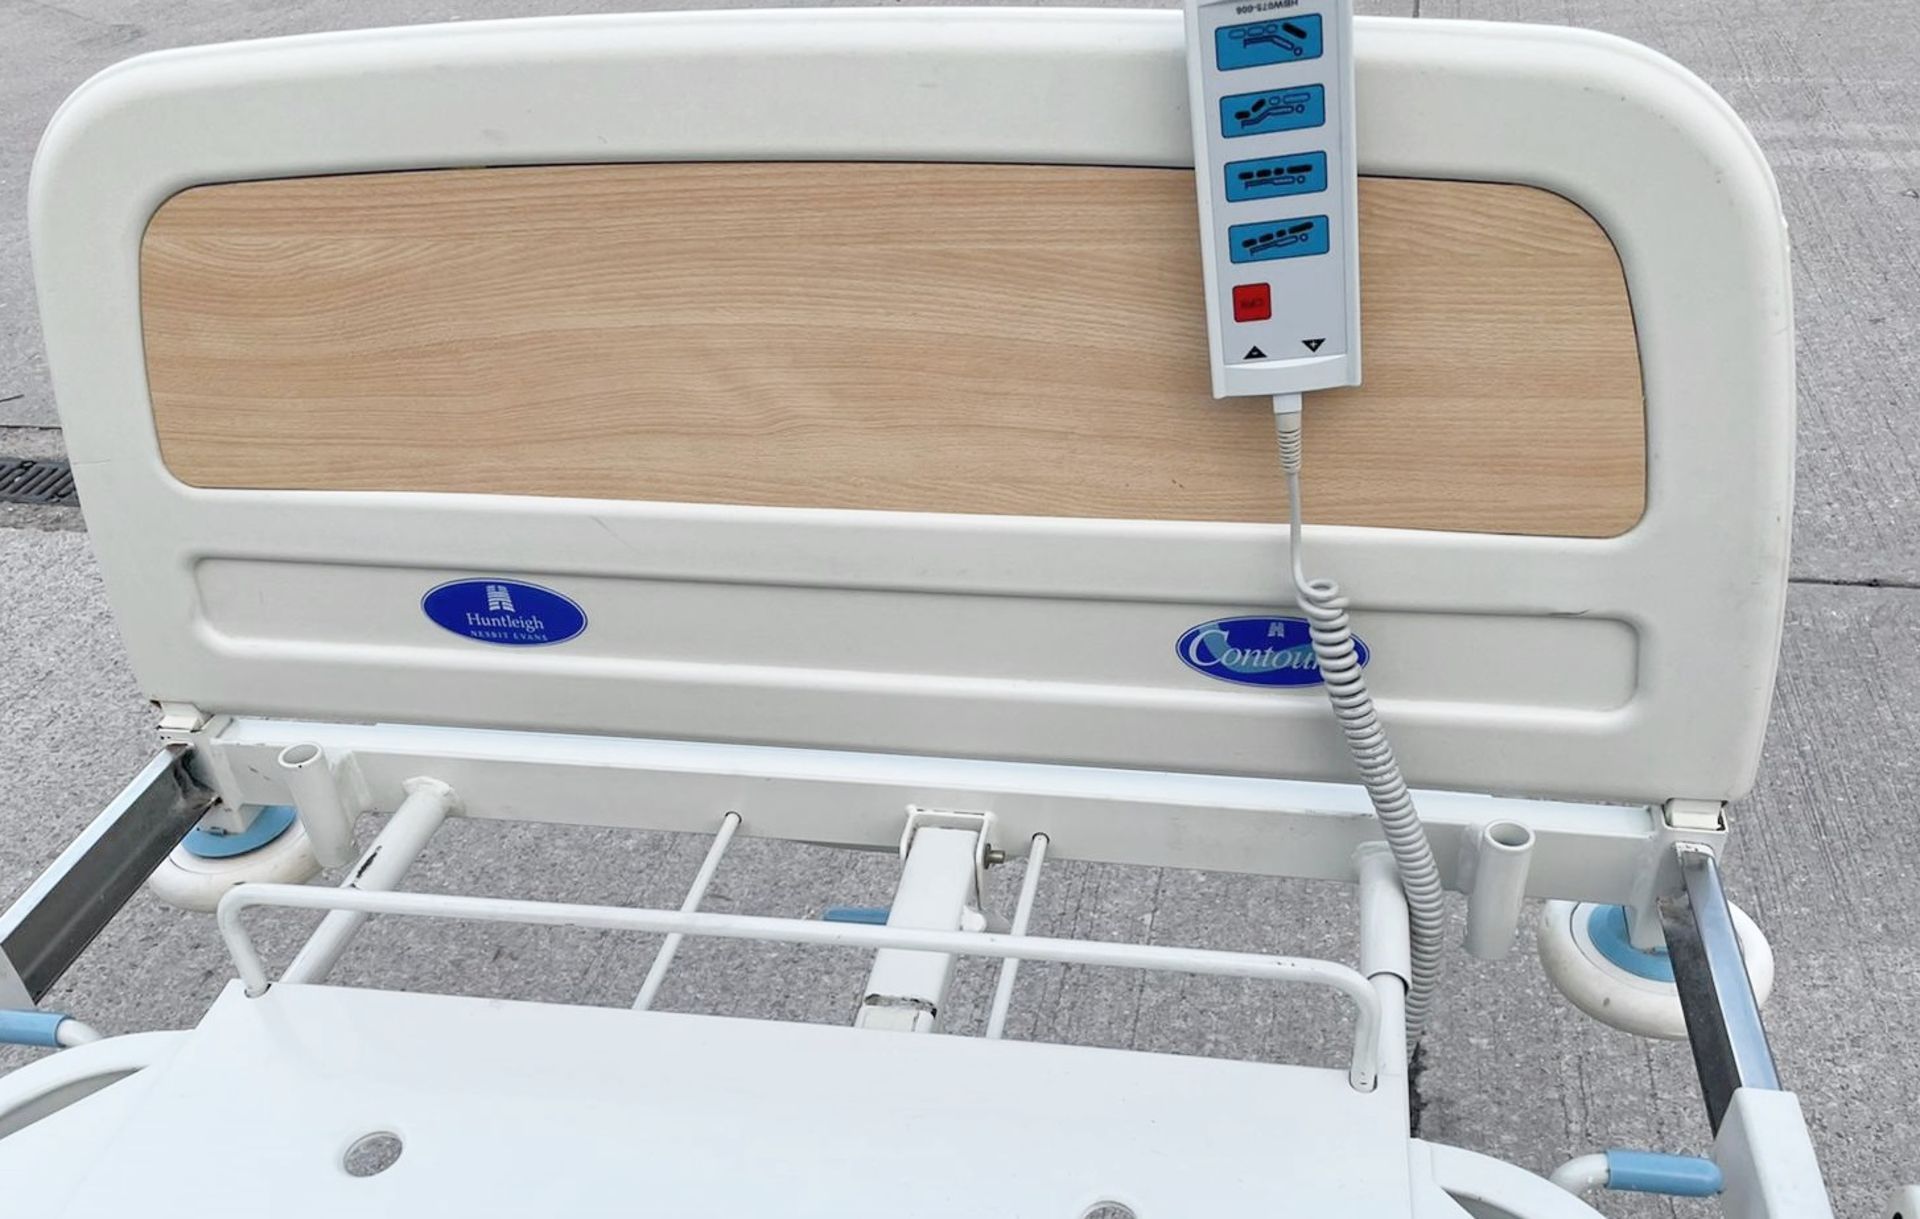 1 x Huntleigh CONTOURA Electric Hospital Bed - Features Rise/Fall 3-Way Profiling, Side Rails, - Image 3 of 5